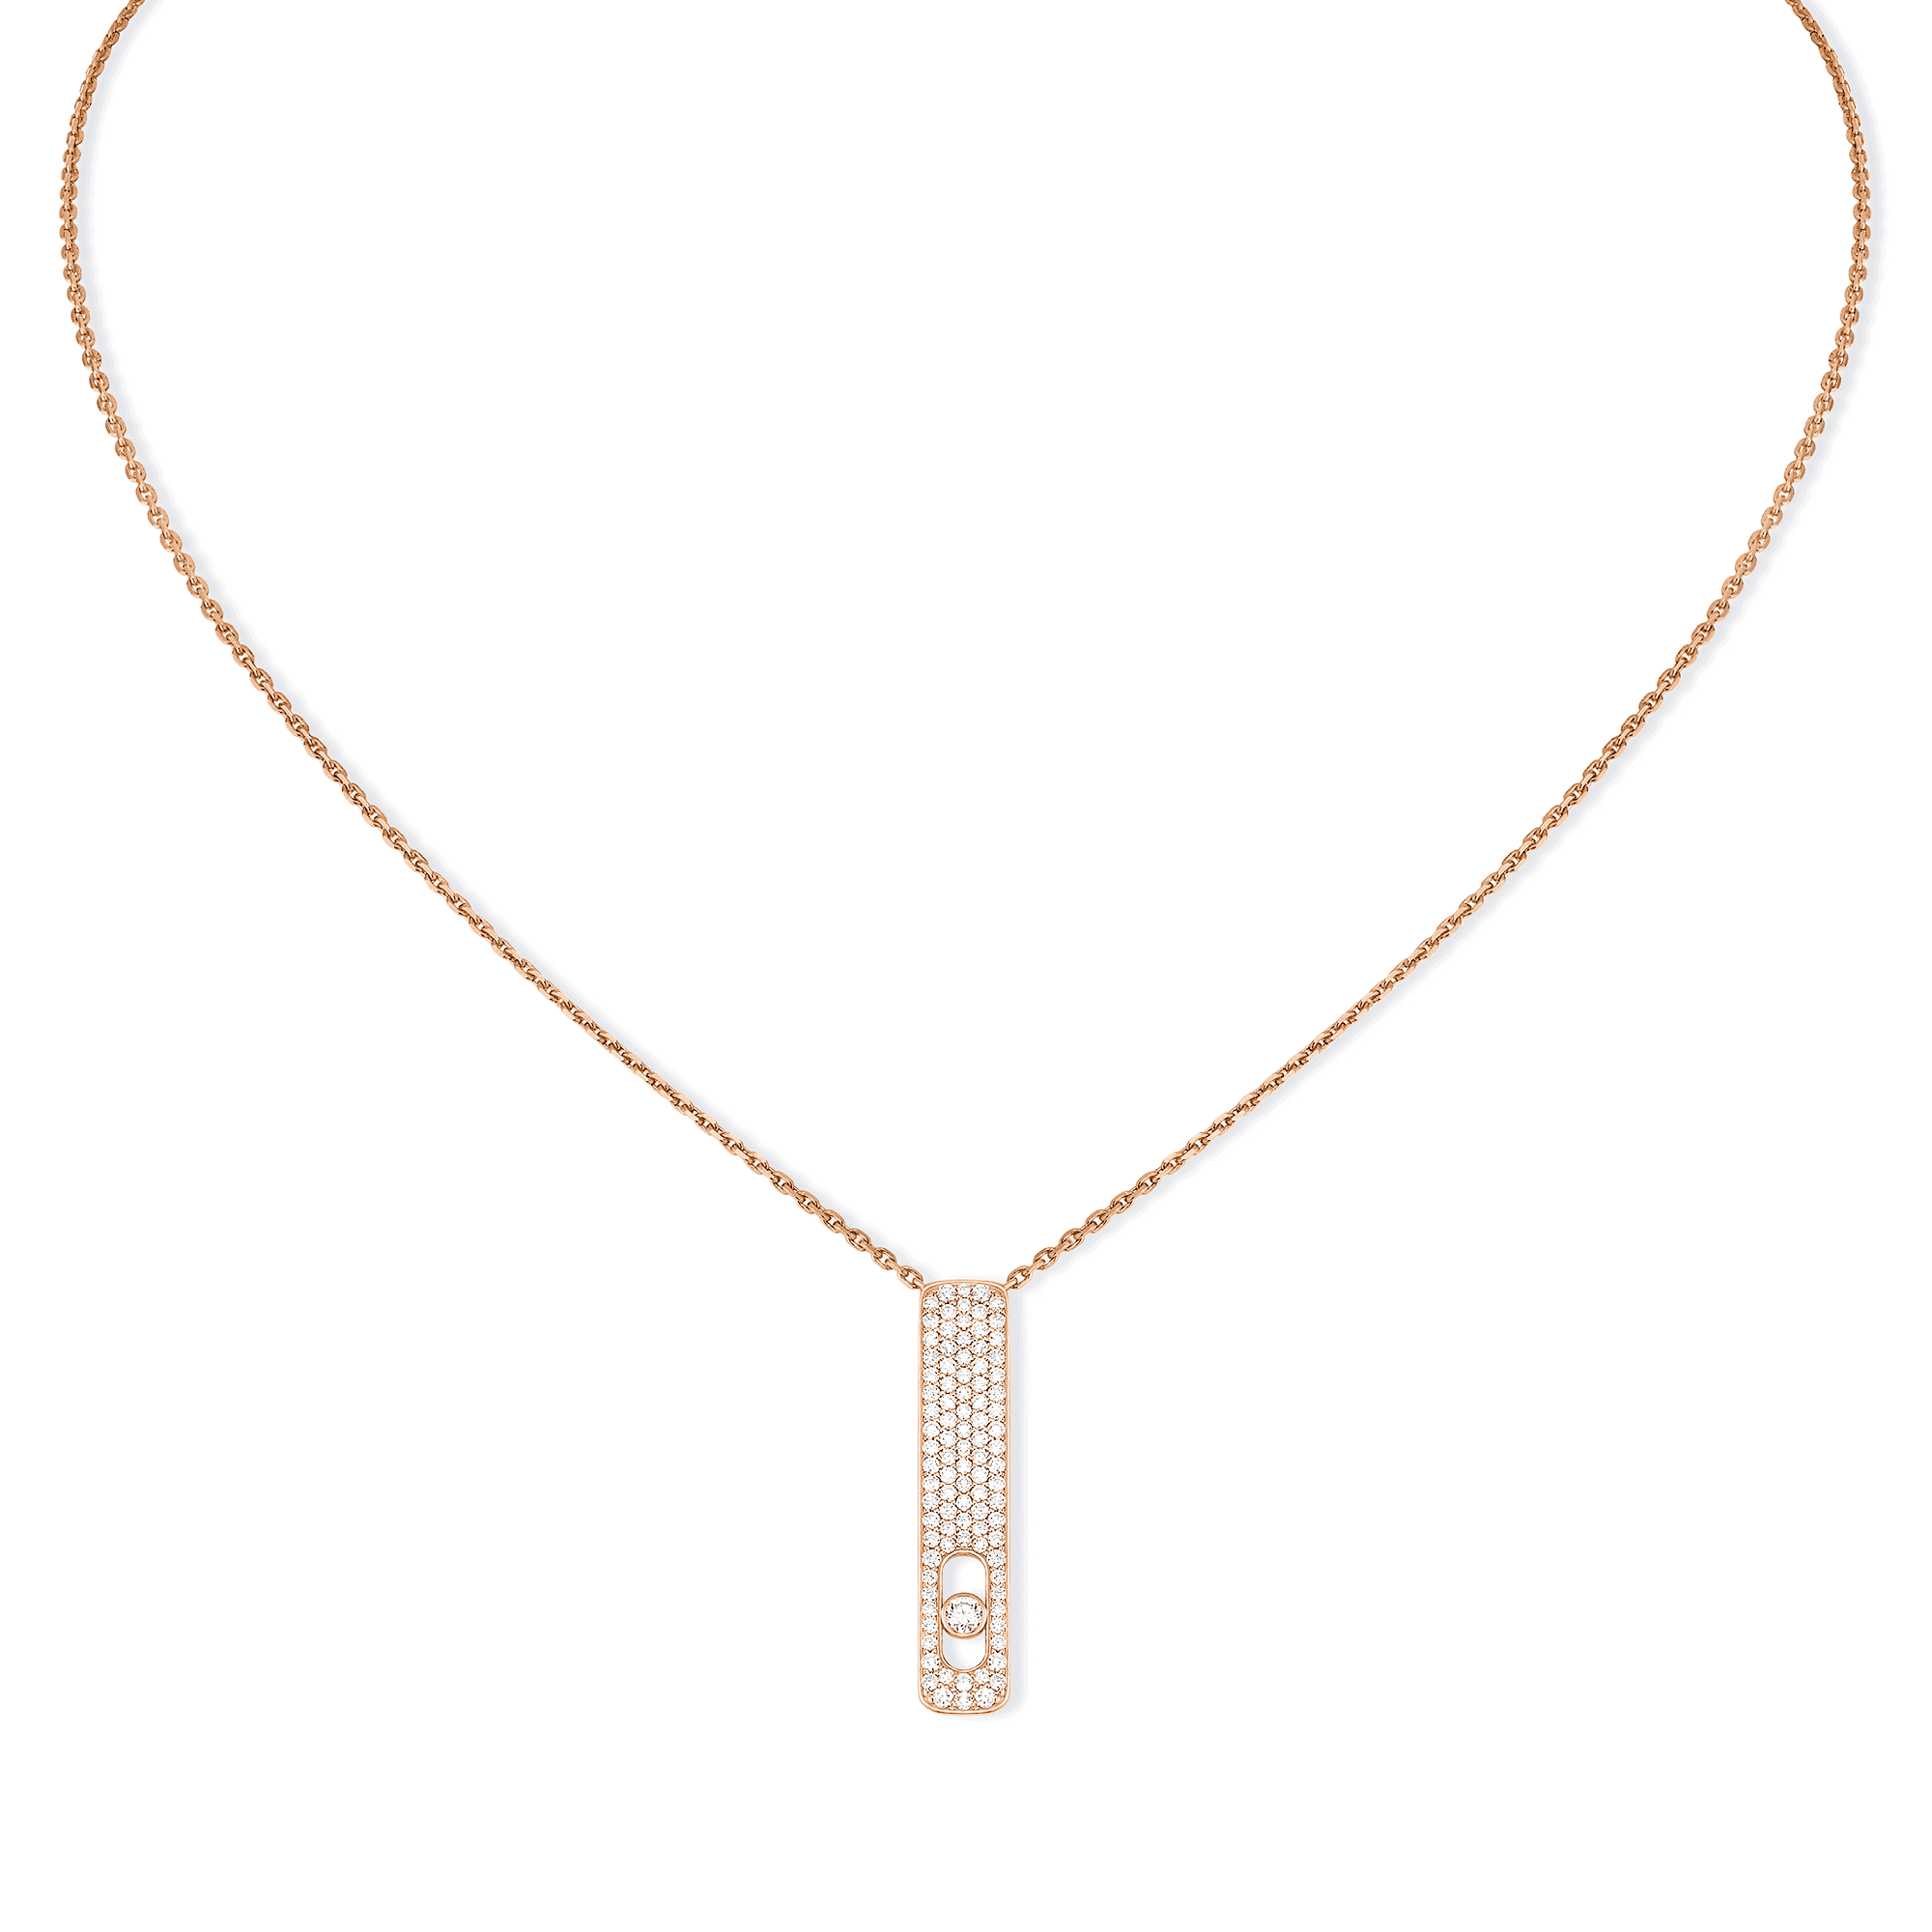 My First Diamond Pave 18ct pink gold necklace